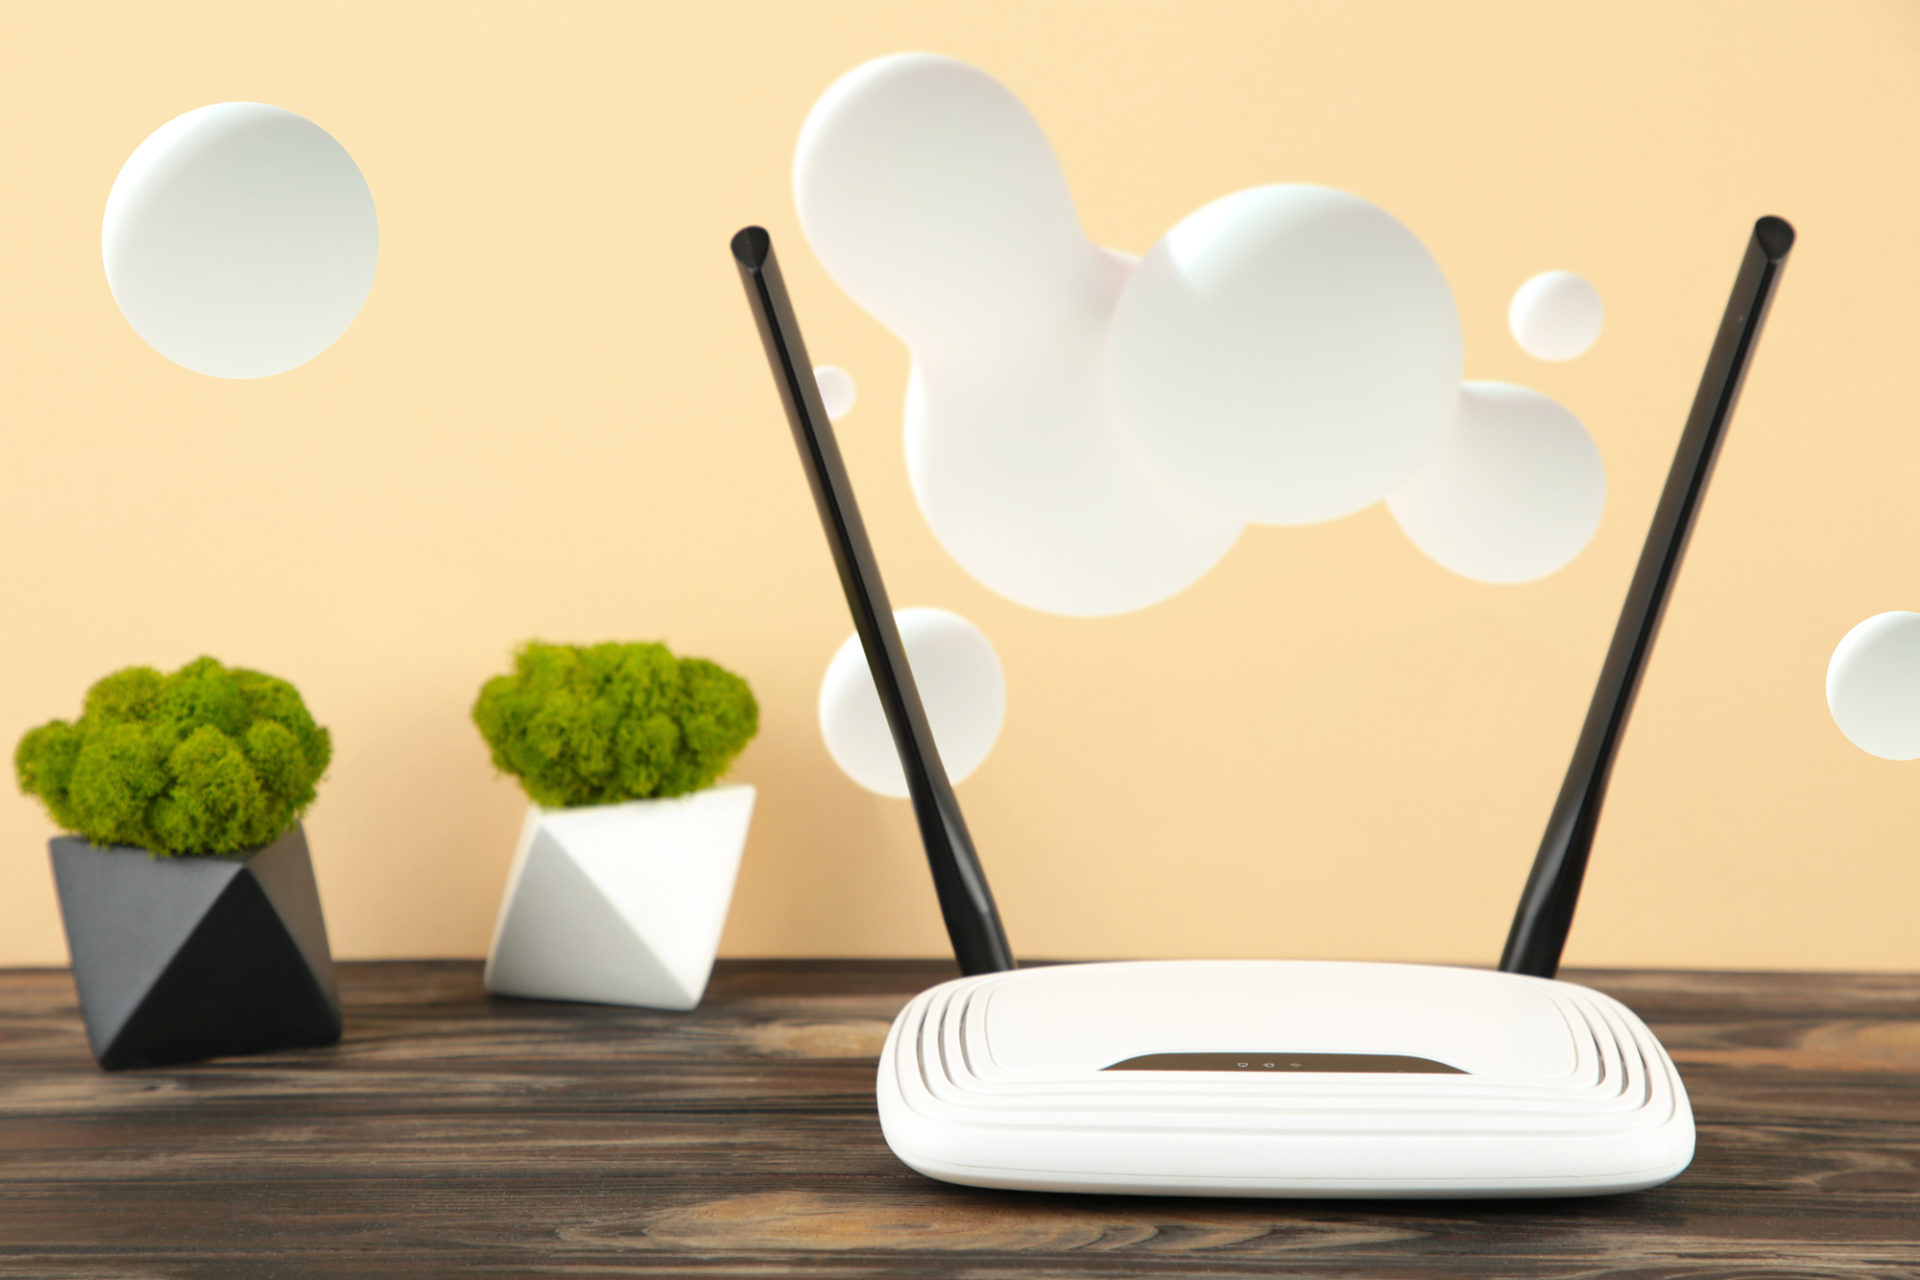 How To Reconfigure Wireless Router